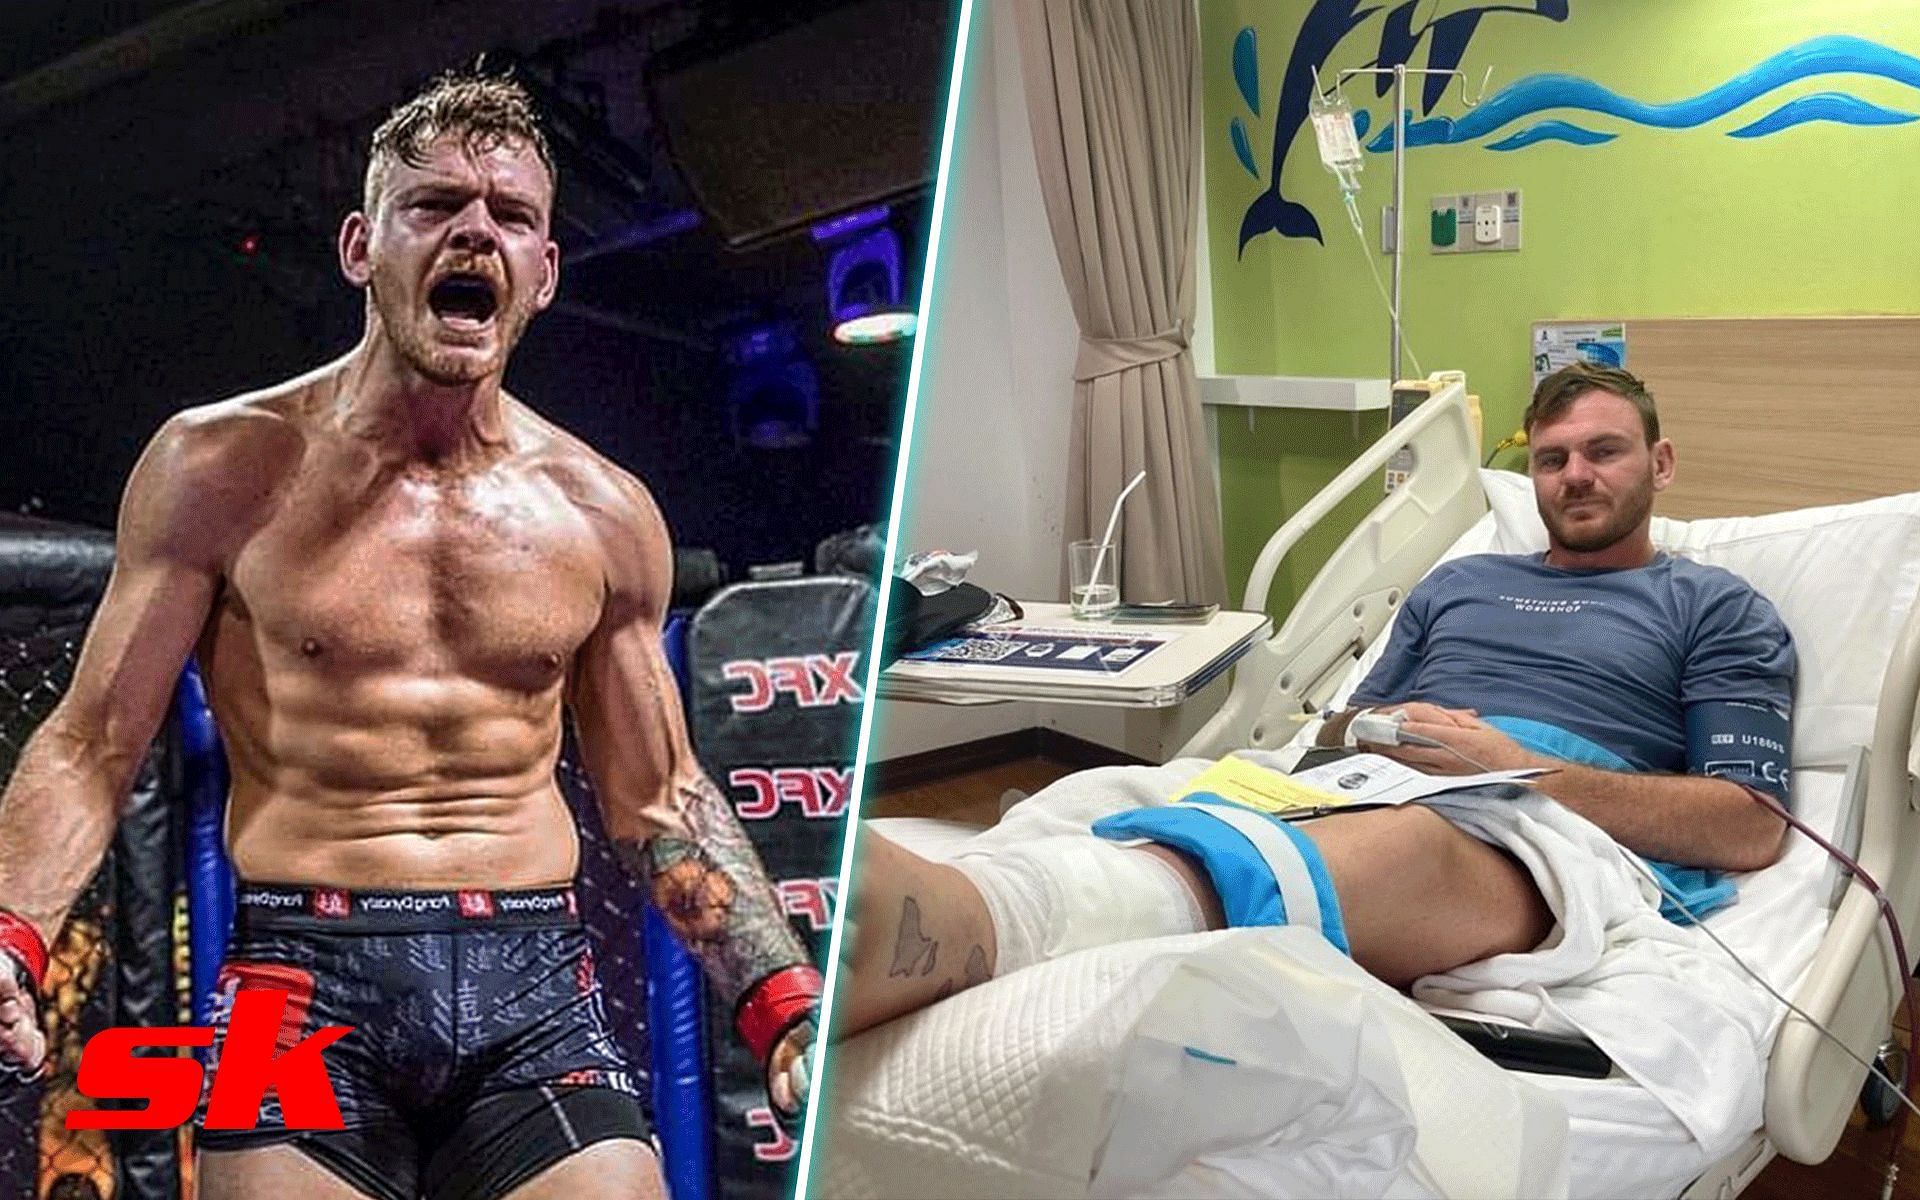 MMA fighter Tim Schultz could lose his leg [Image courtesy: @timbotmma on Instagram]